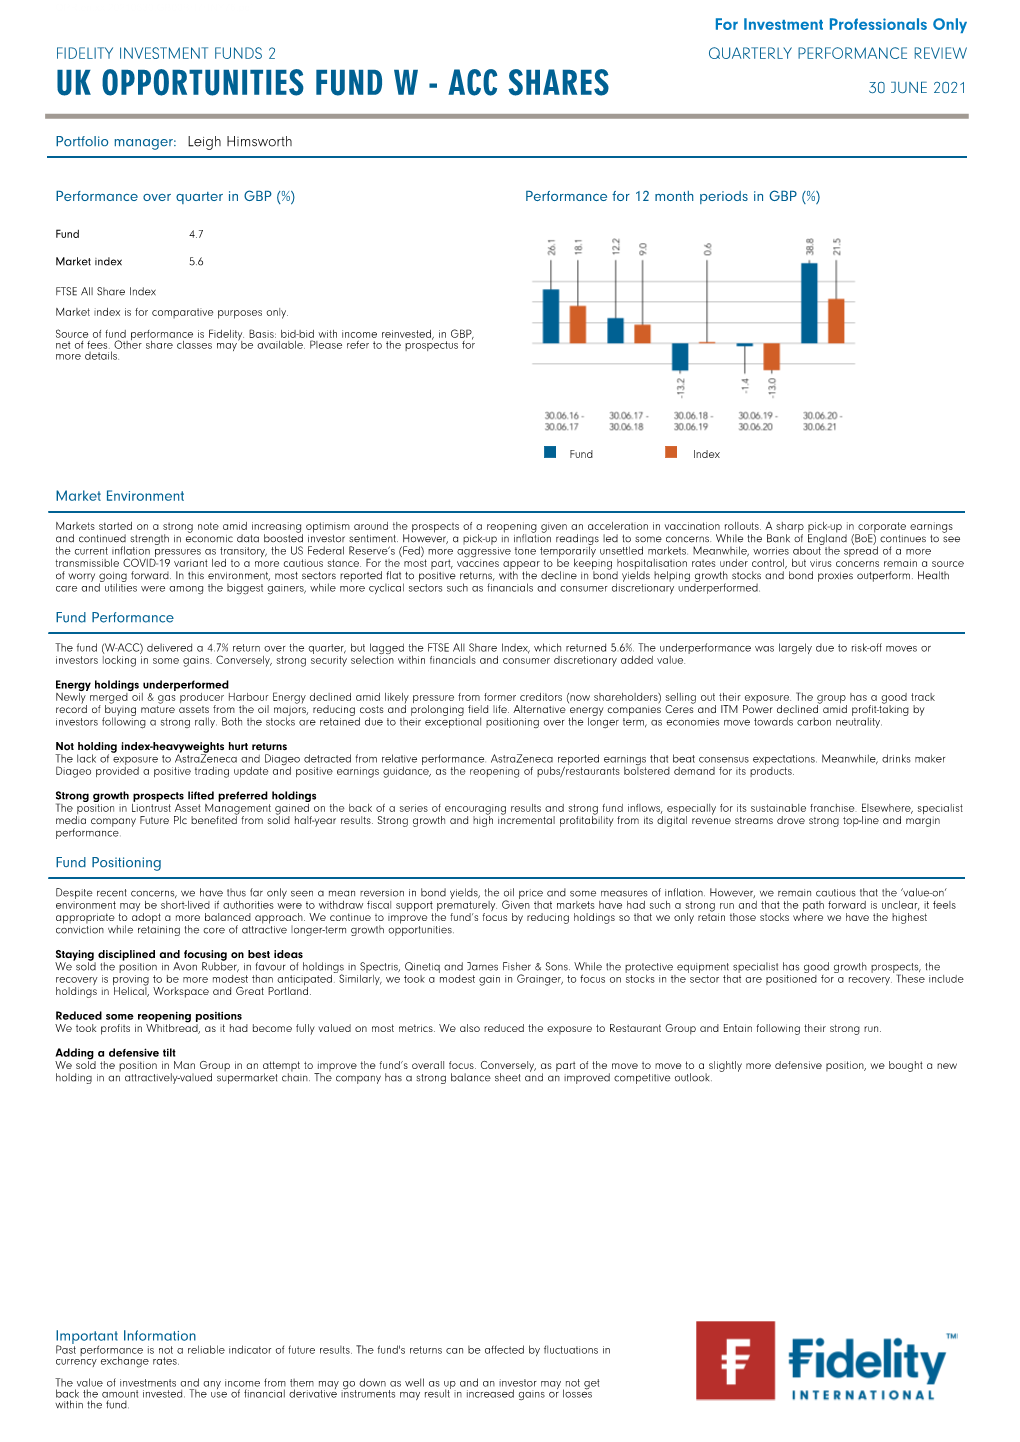 Quarterly Performance Review Uk Opportunities Fund W - Acc Shares 30 June 2021